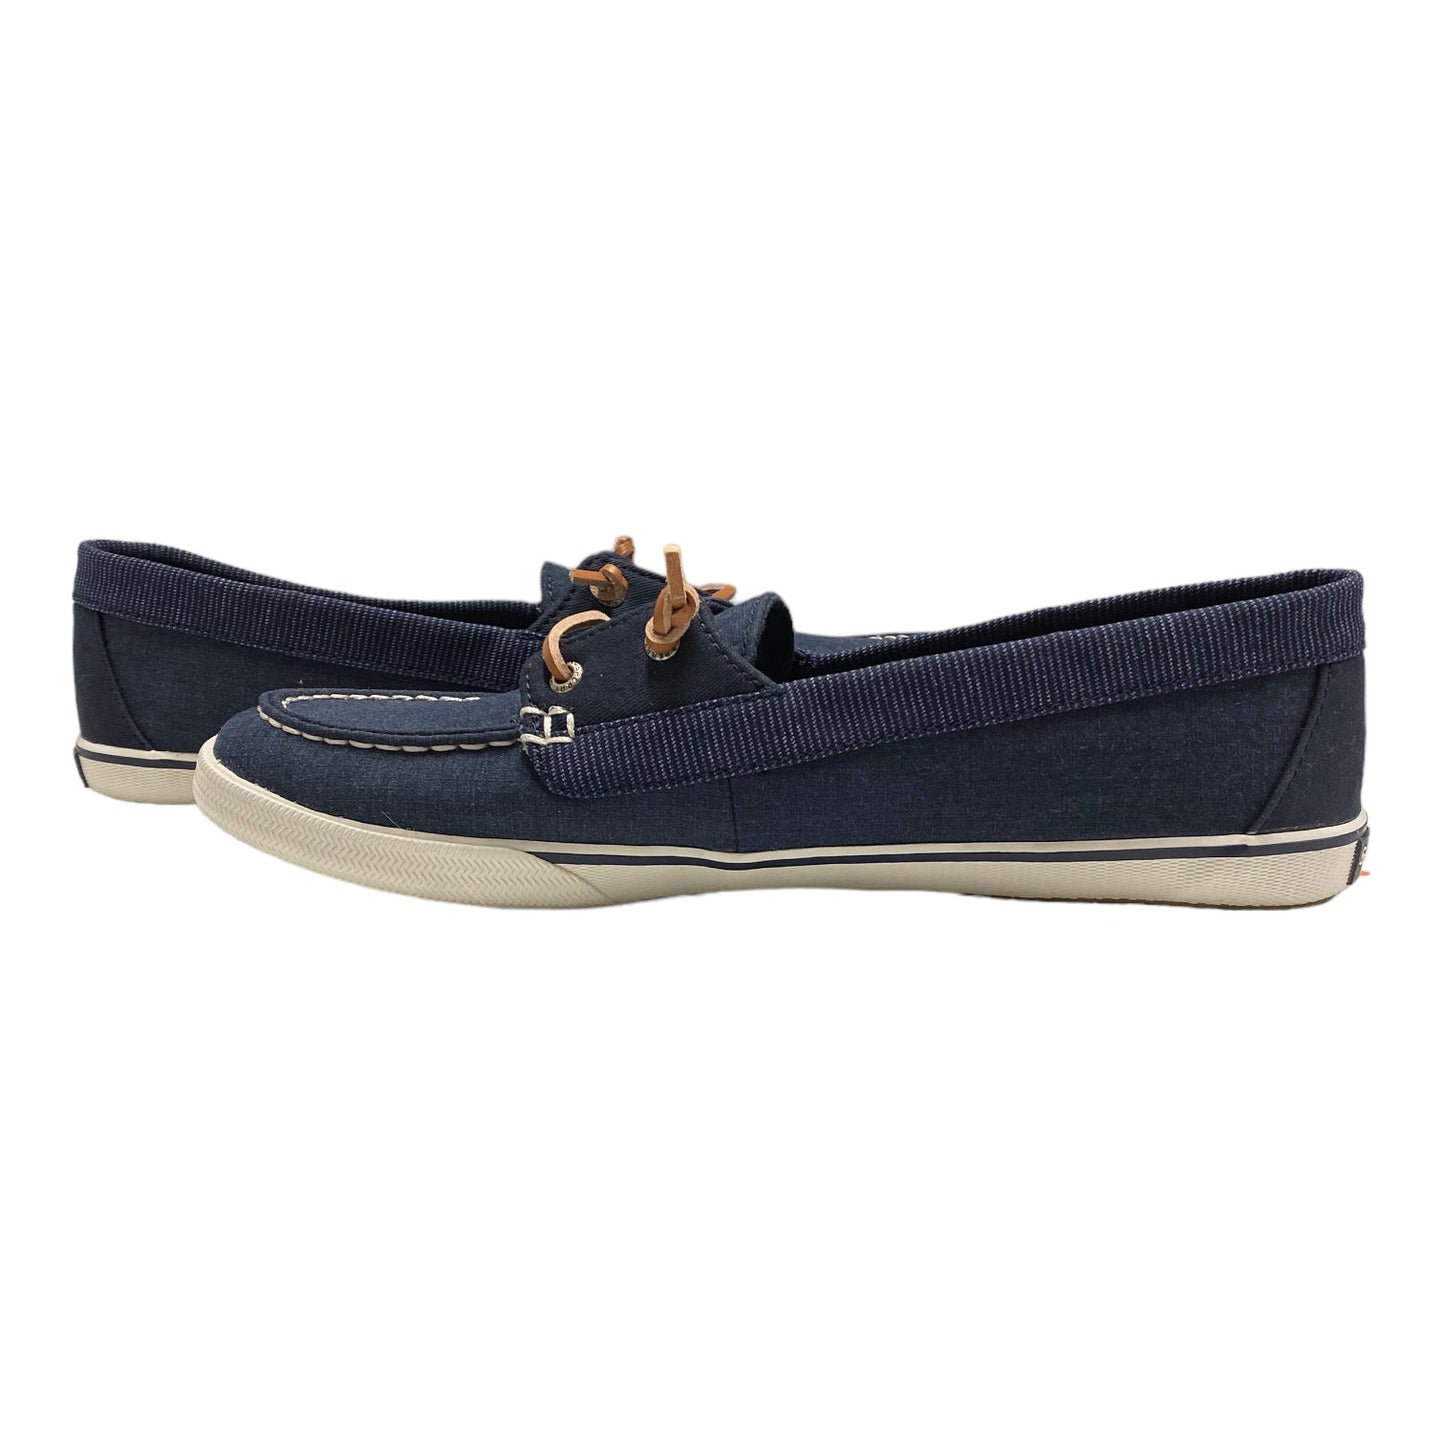 Shoes Sneakers By Sperry  Size: 12